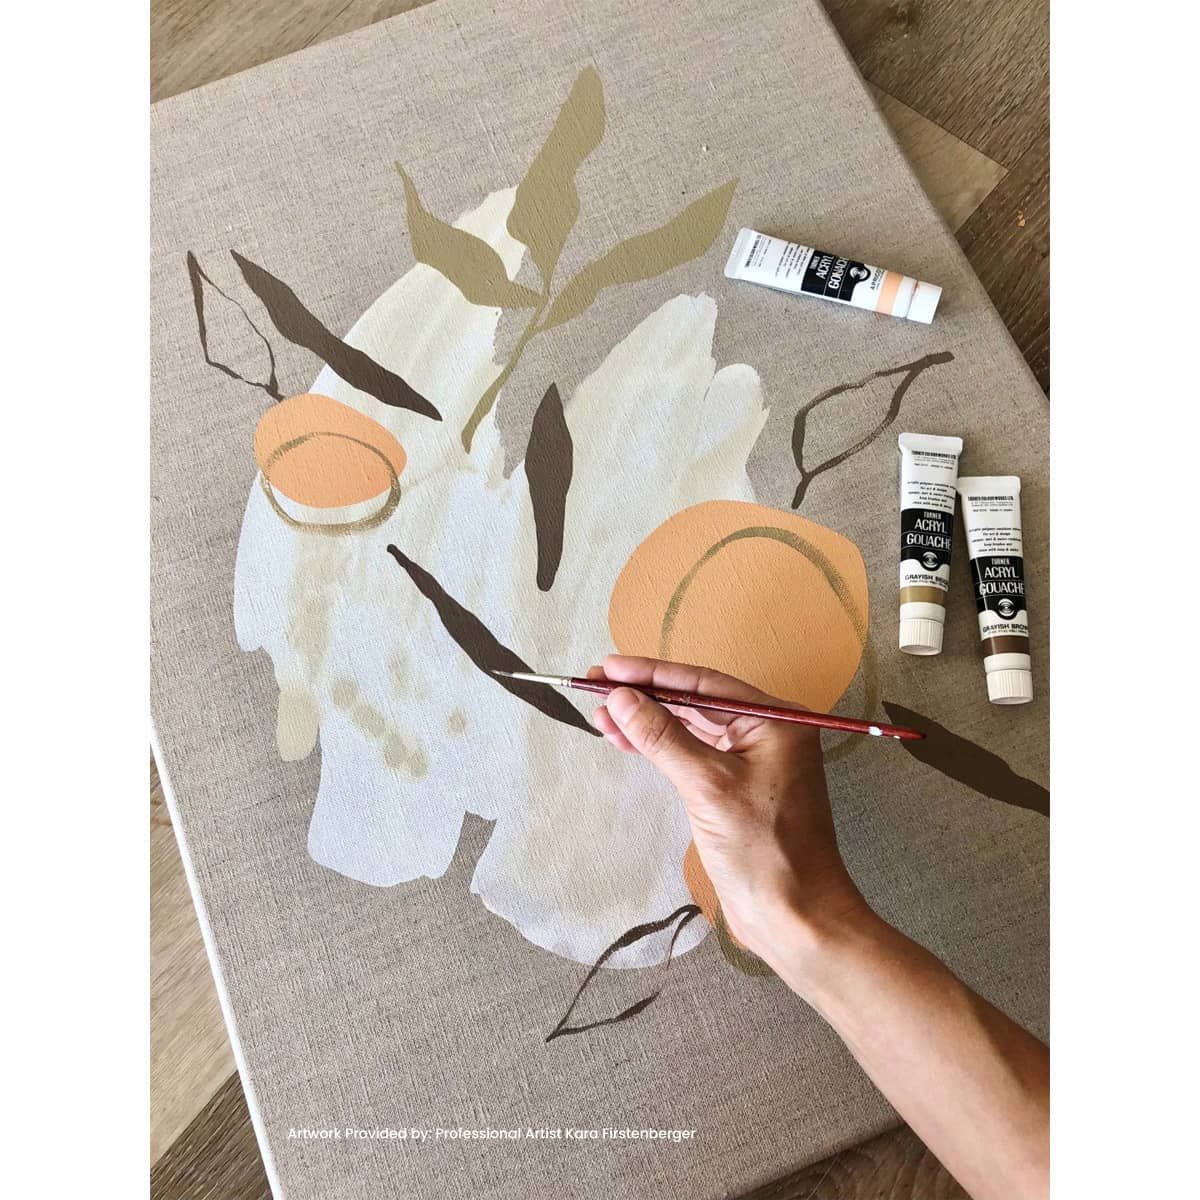 Expertly stretched! Artwork by Kara Firstenberger (Turner Acryl Gouache, Senso Canvas)